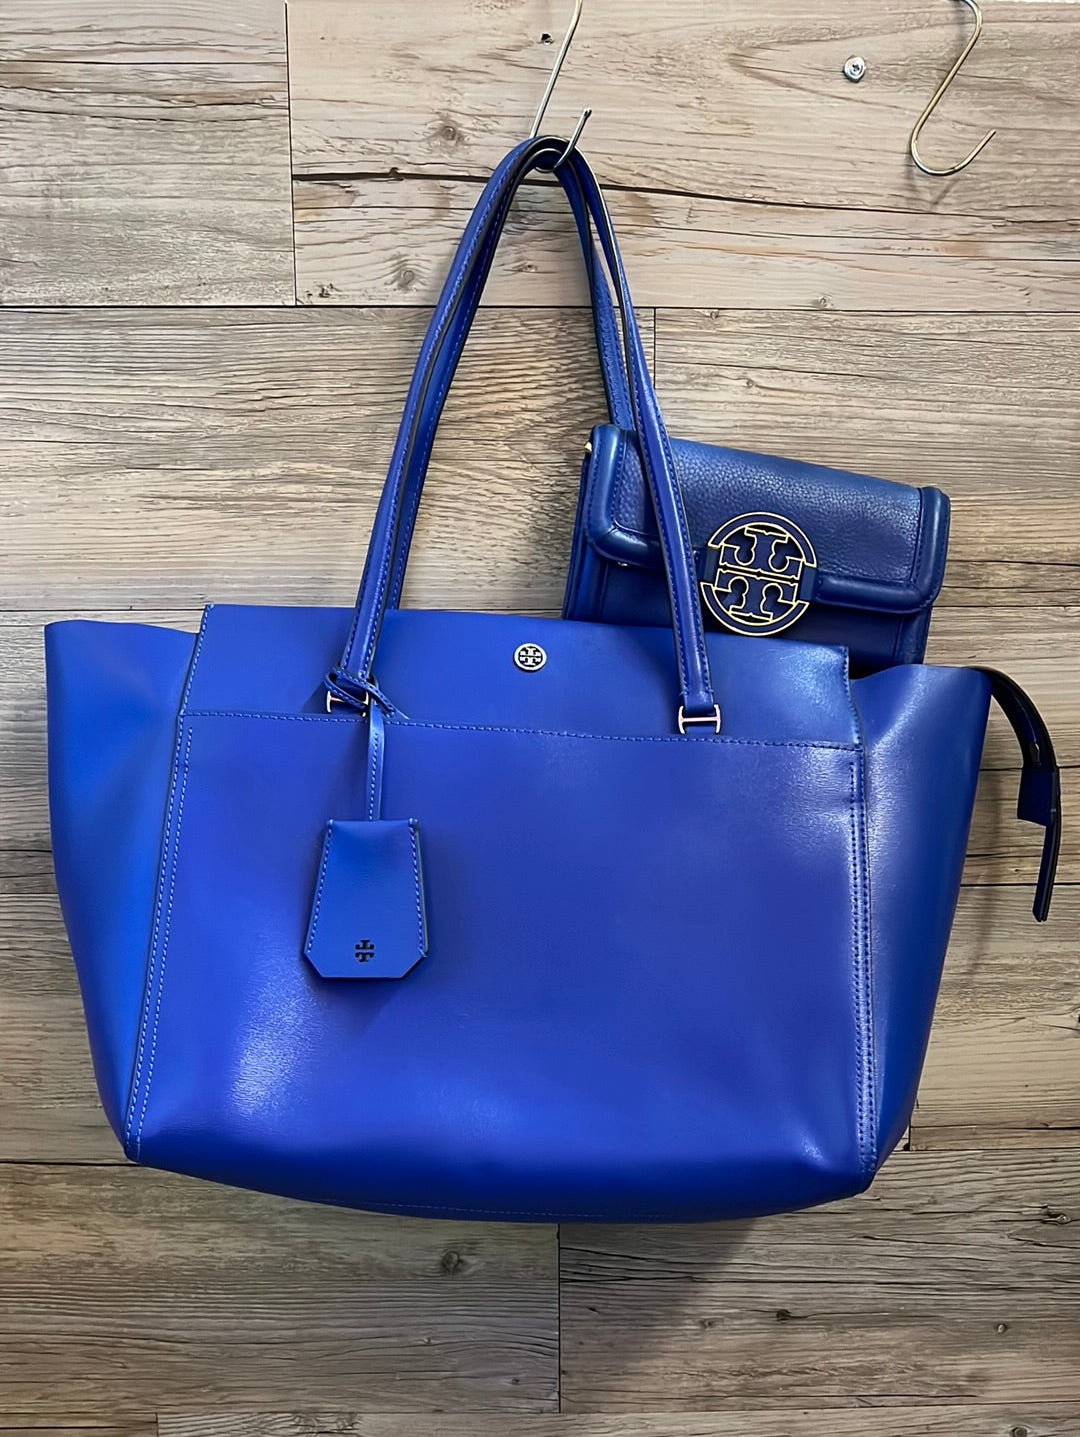 Tory Burch Tote & Leather Wallet Set